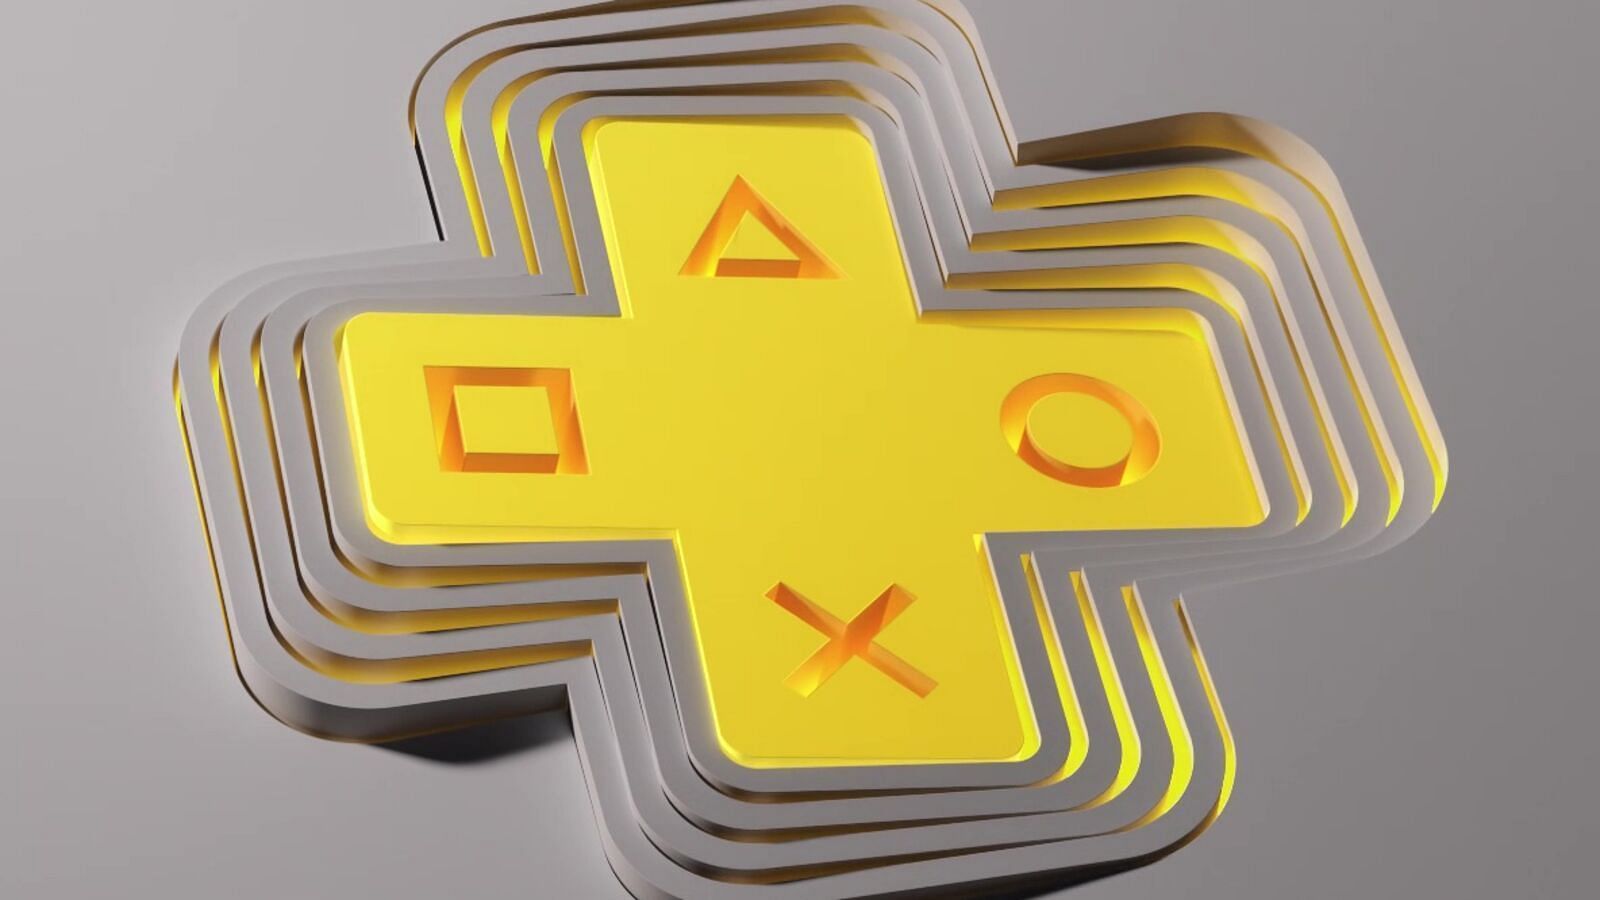 New PS Plus Deluxe And Extra Plans Officially Revealed –